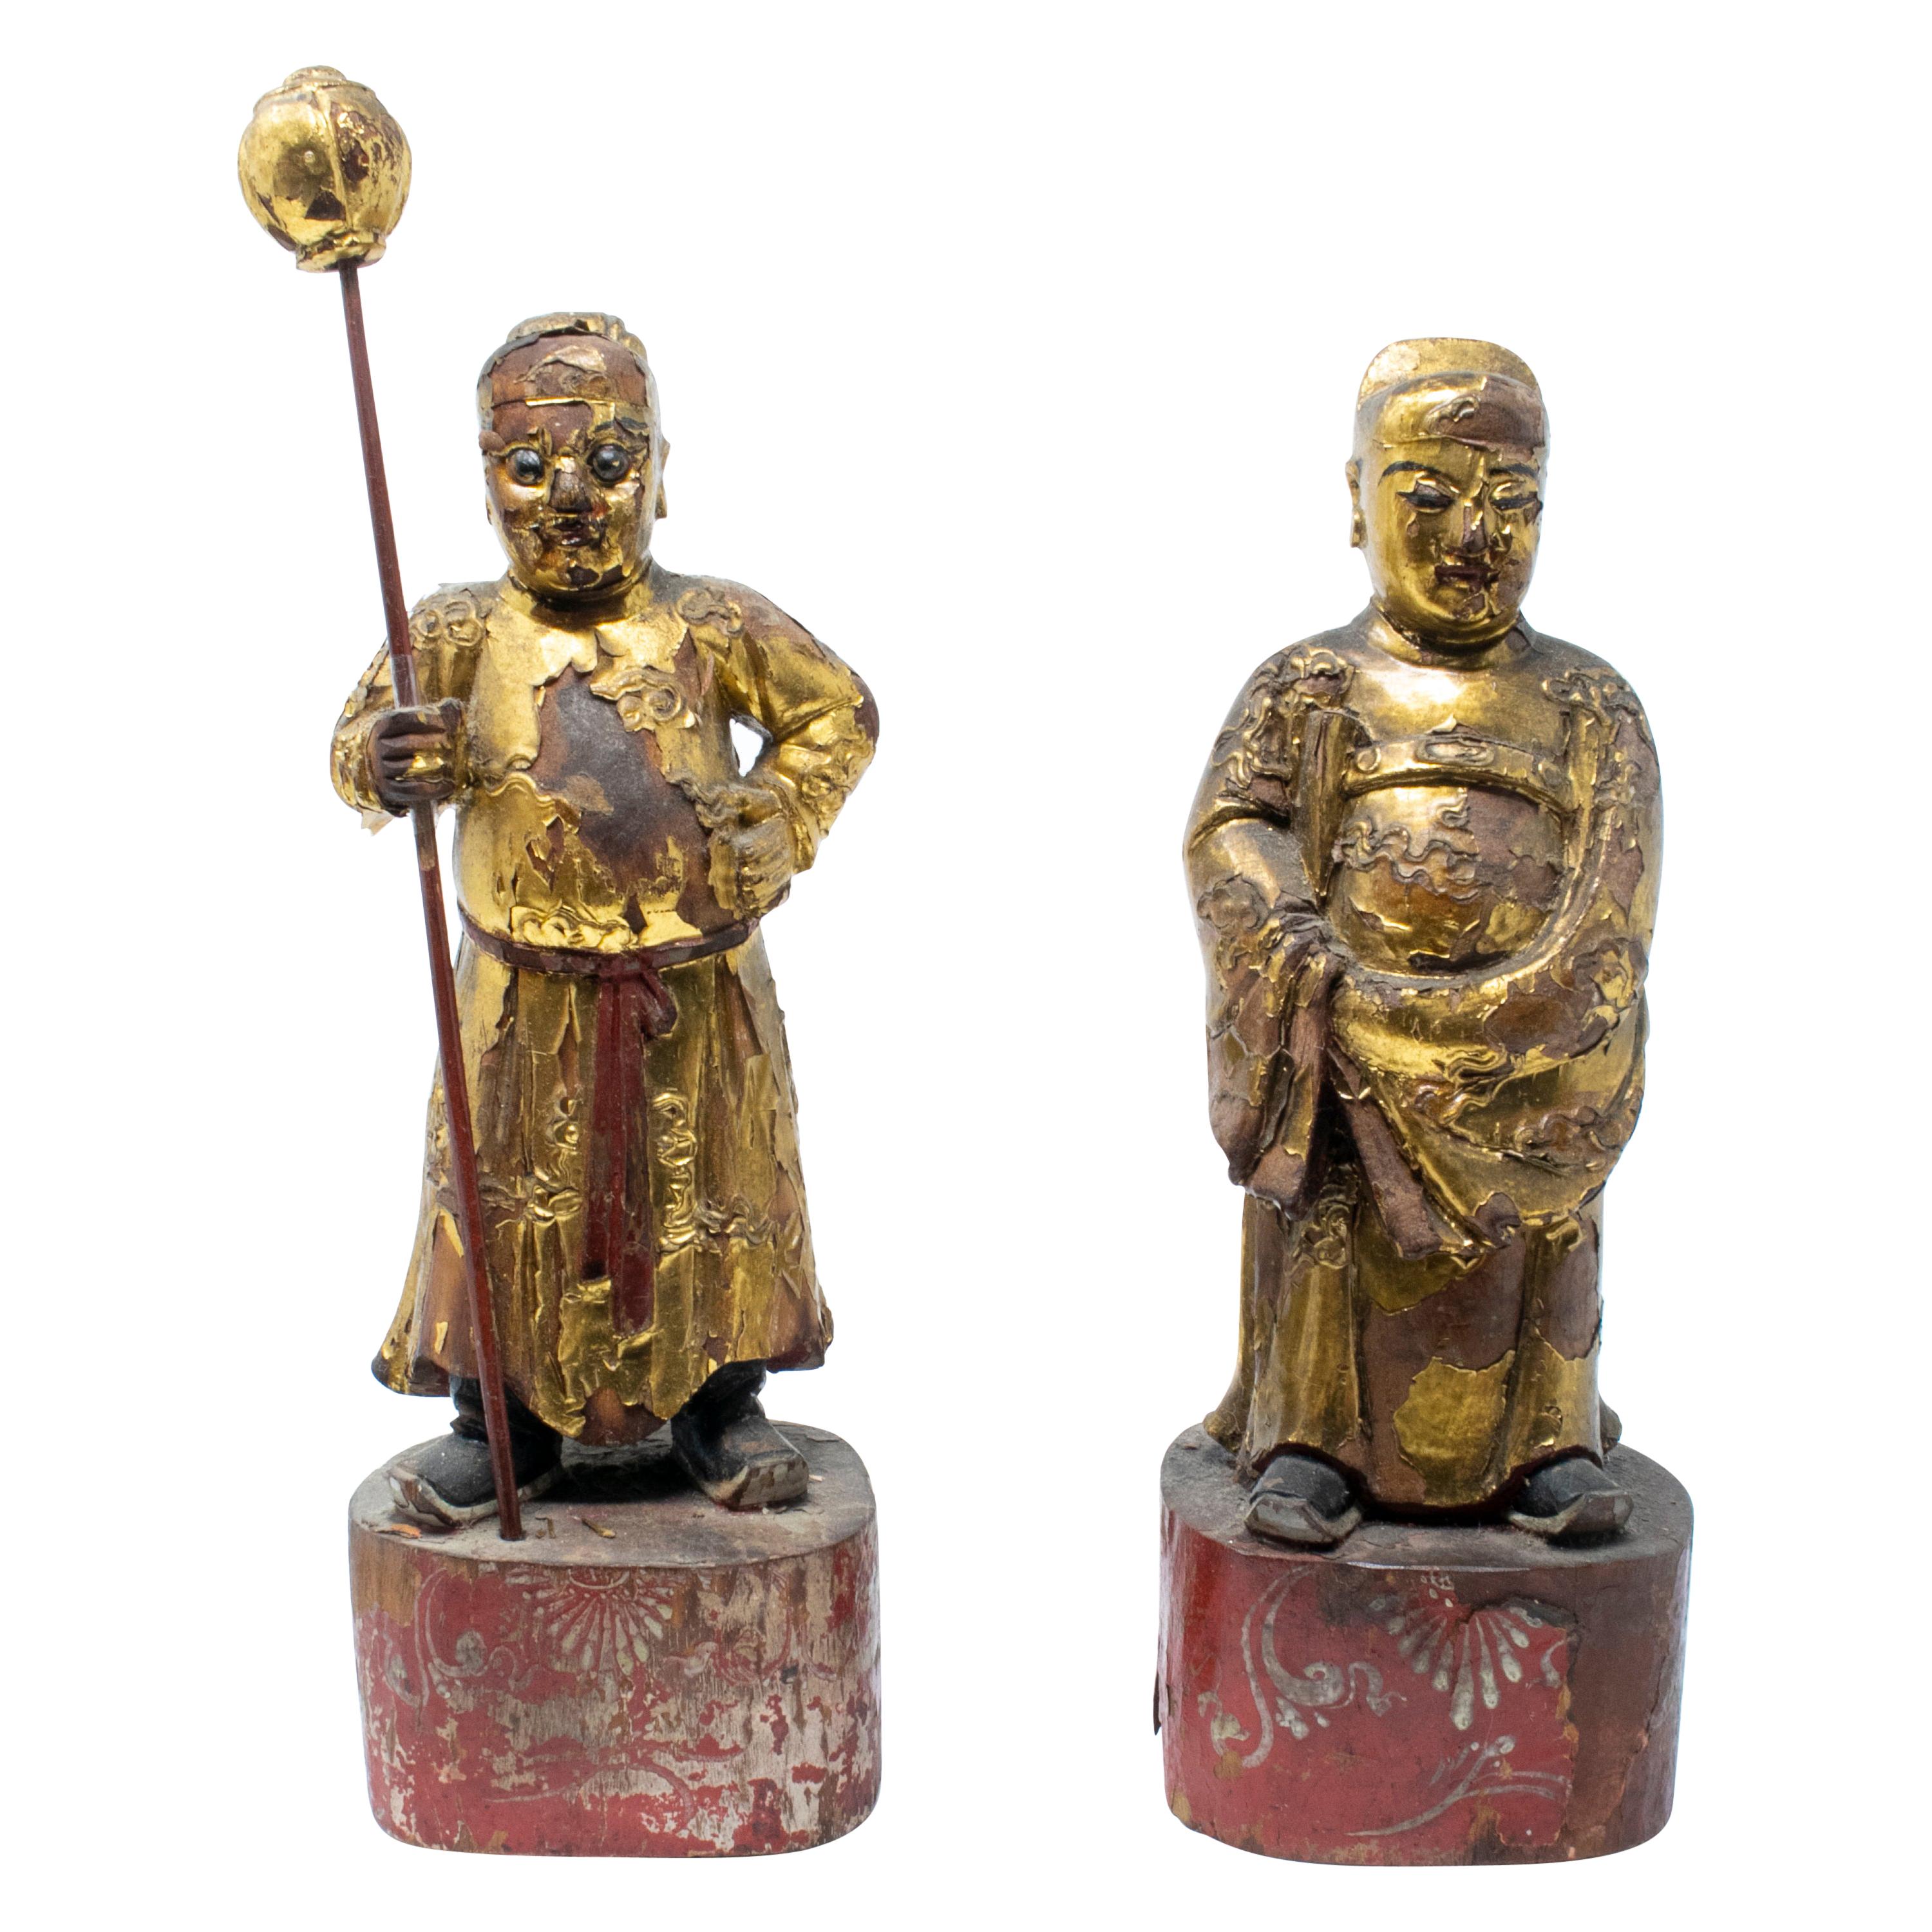 18th Century Pair of Gilded Hand Carved Wooden Buddhist Monks